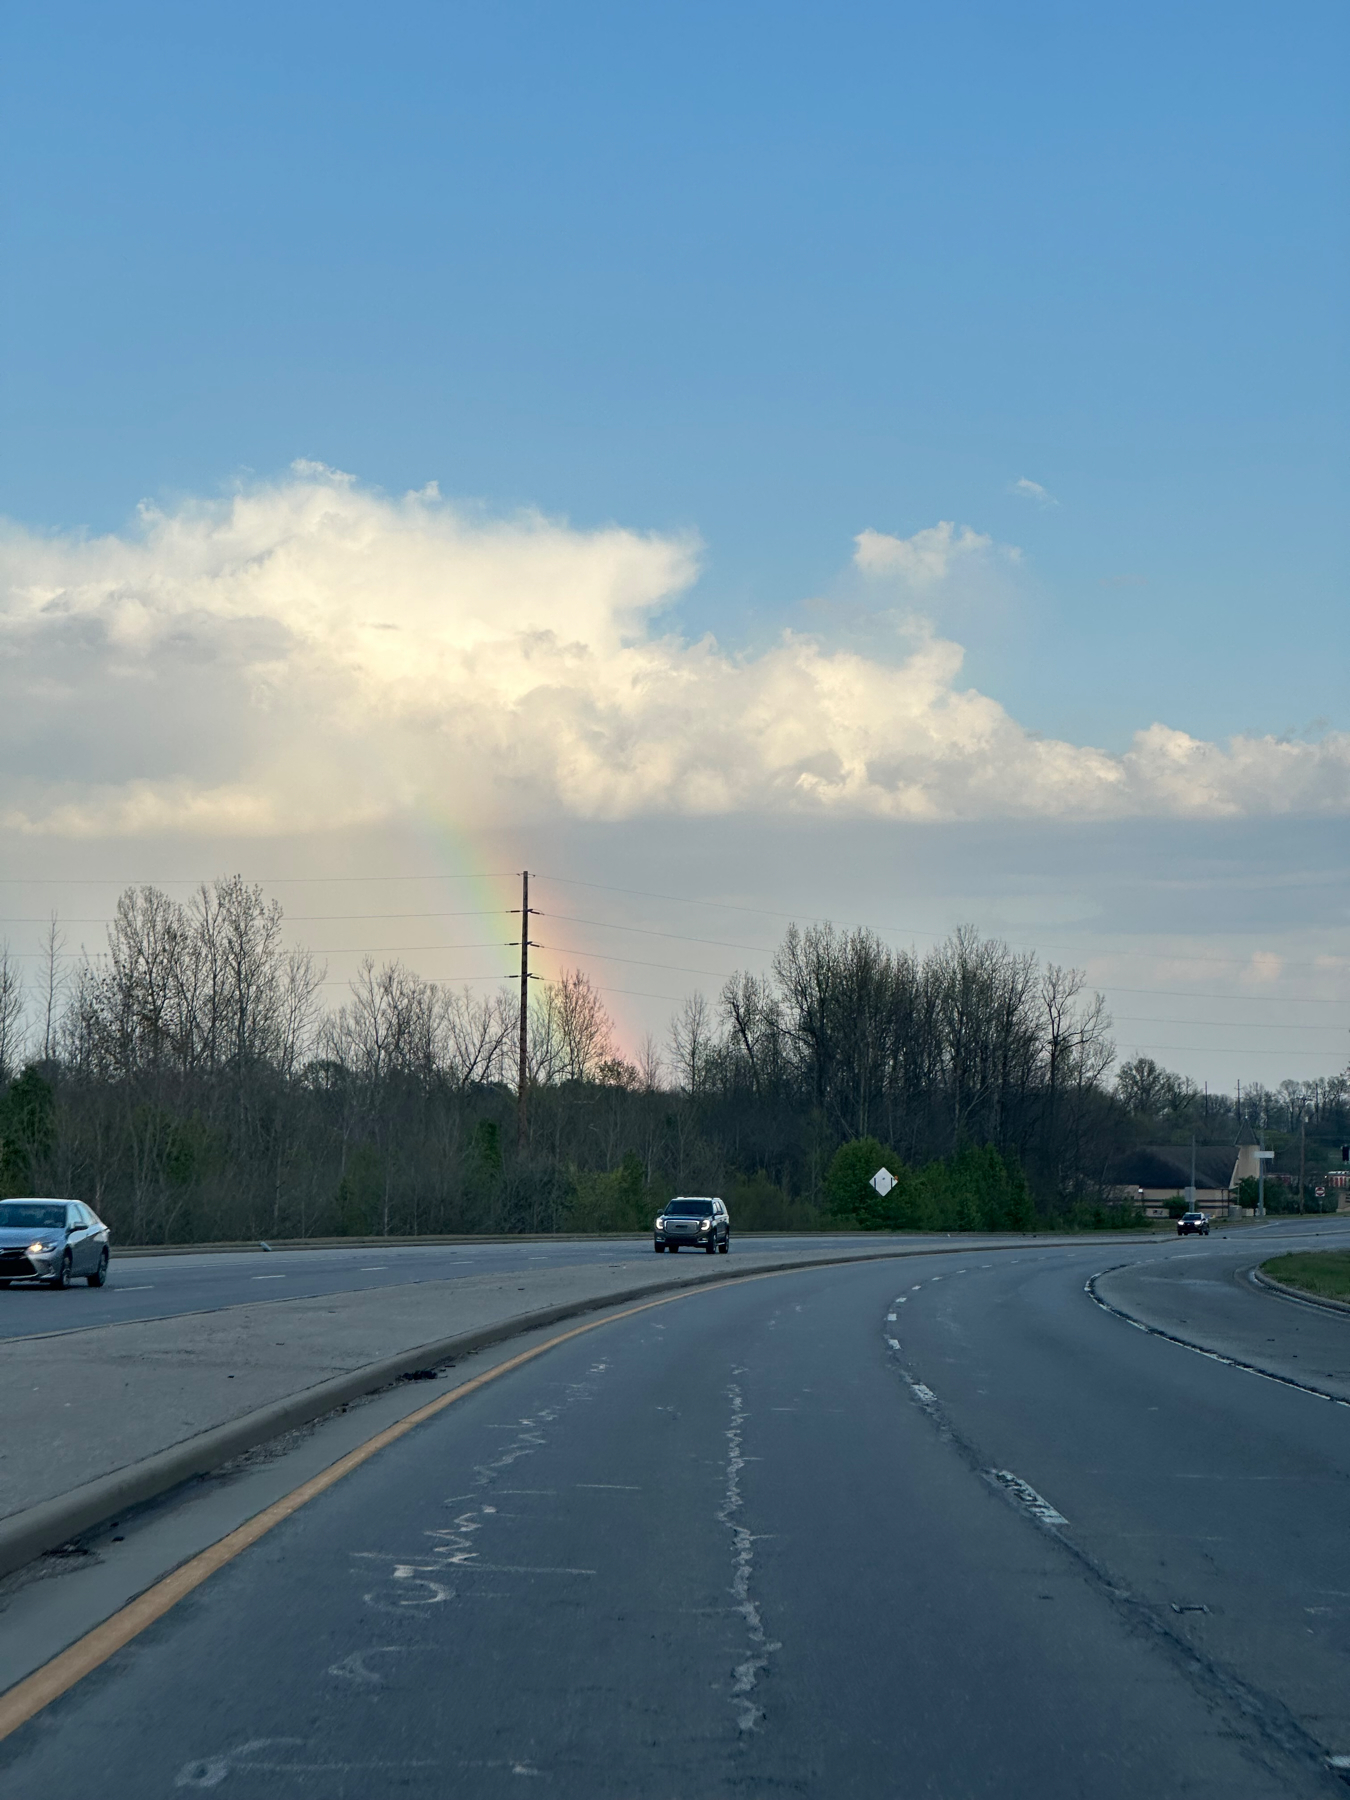 A road curving to the right with vehicles in the distance and a faint rainbow appearing in the partial cloud cover against a blue sky.